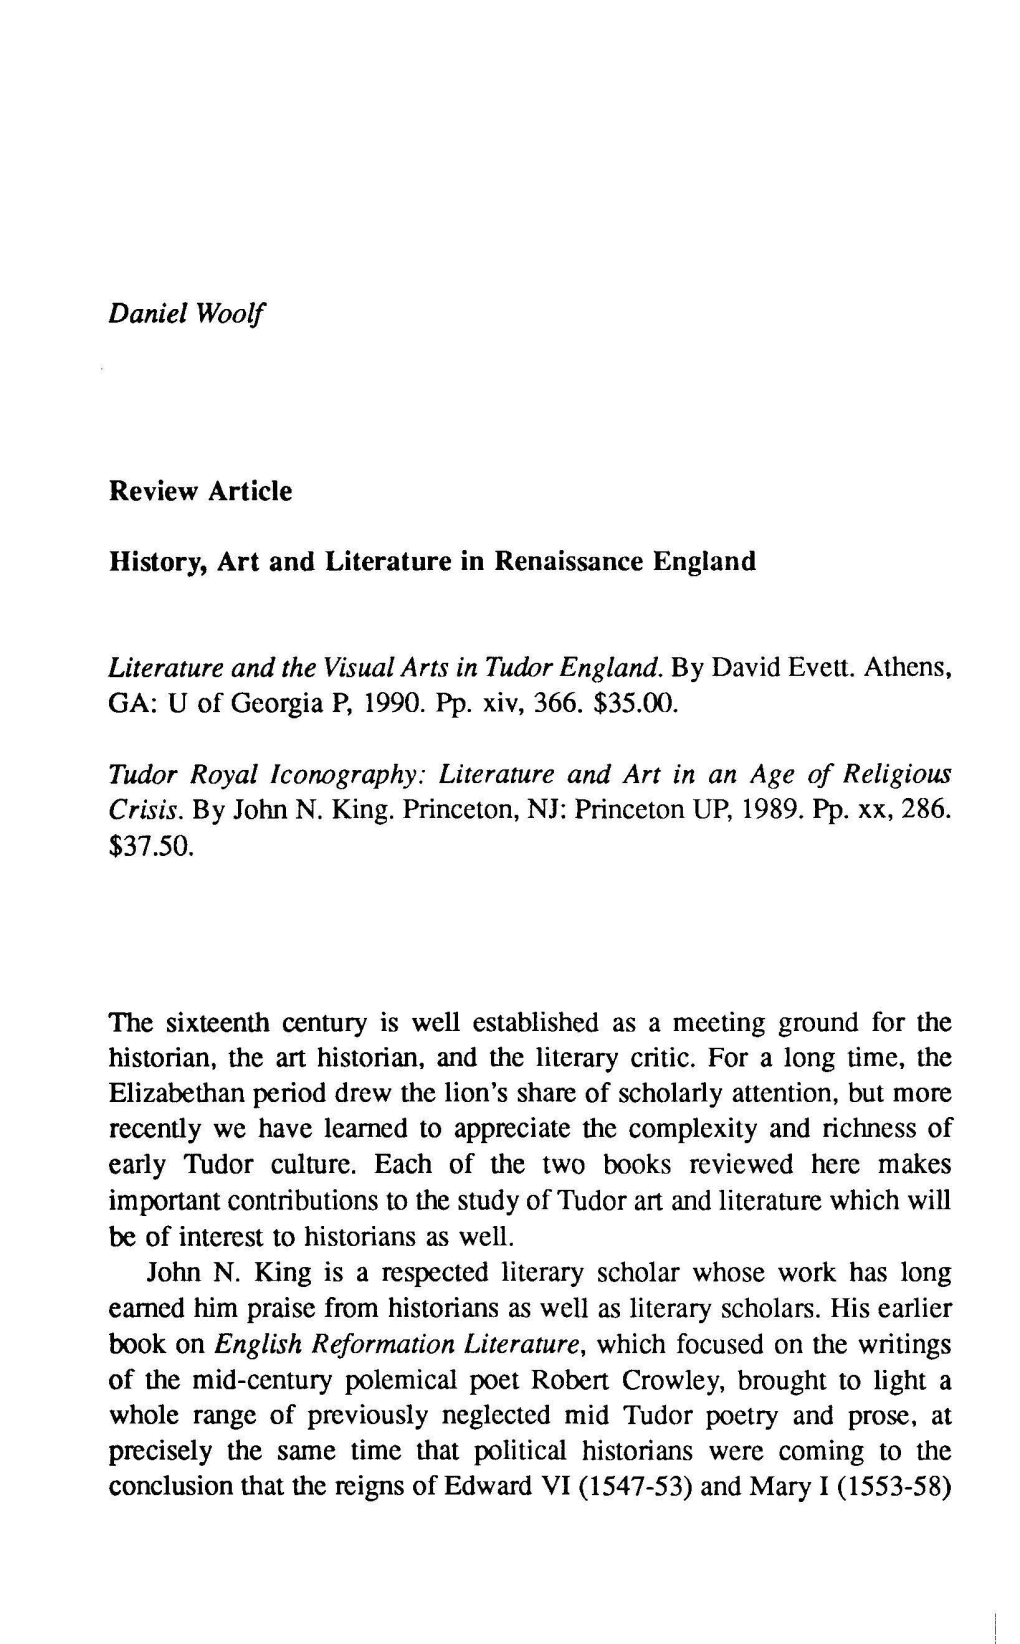 Daniel Woolf Review Article History, Art and Literature in Renaissance